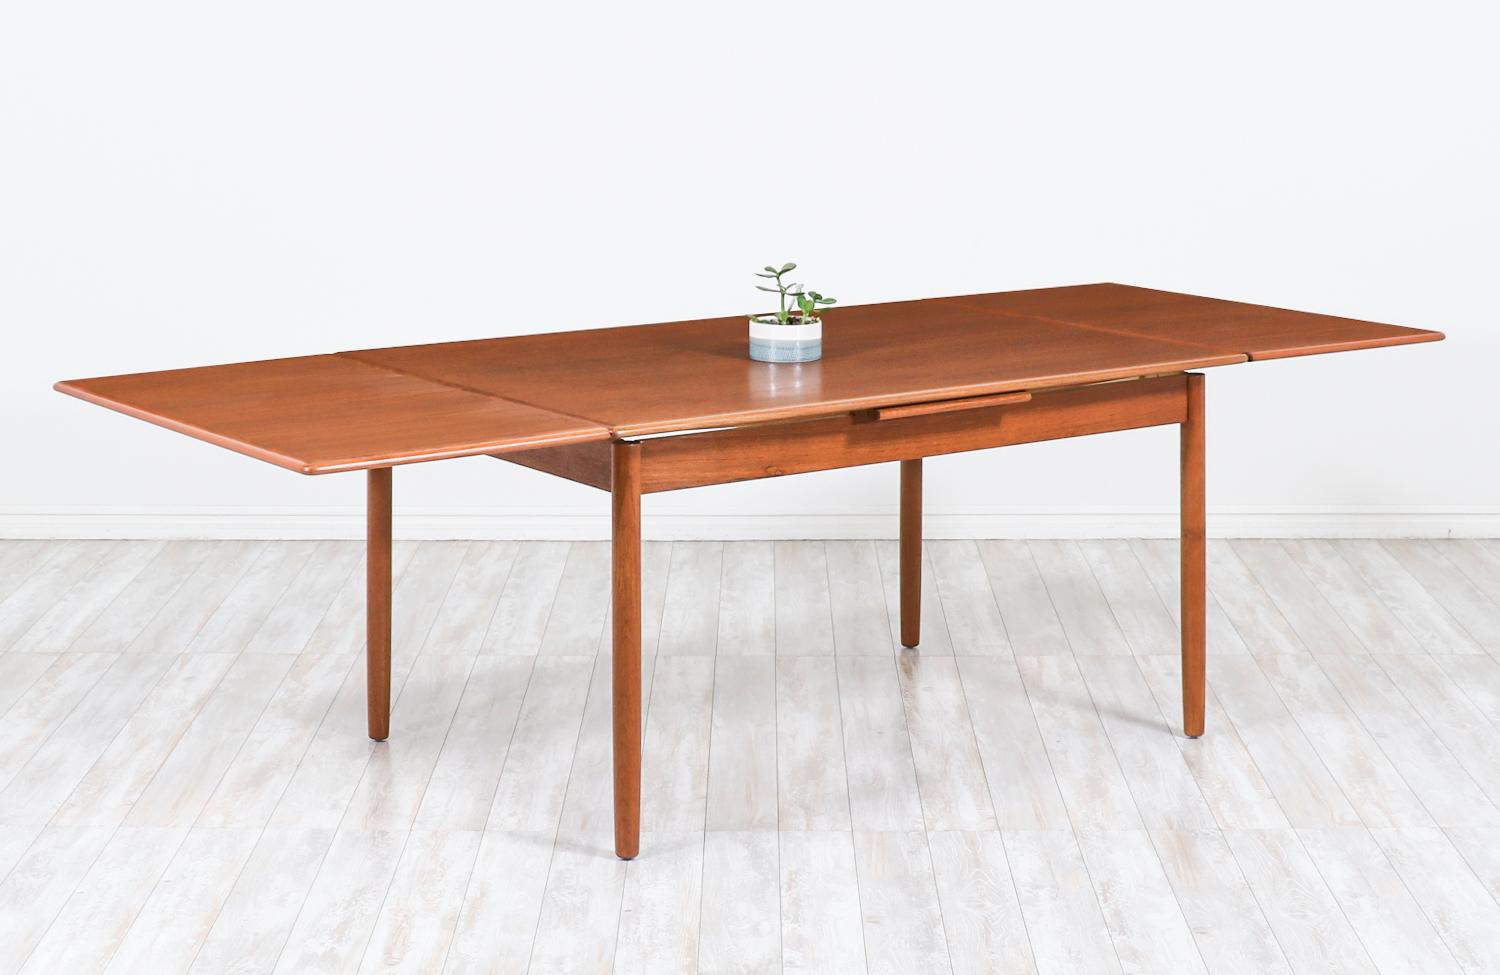 Danish modern expanding draw-leaf teak dining table

Dimensions
29in H x 55in W - 97in W x 39in D
Each extension leaf 21in.